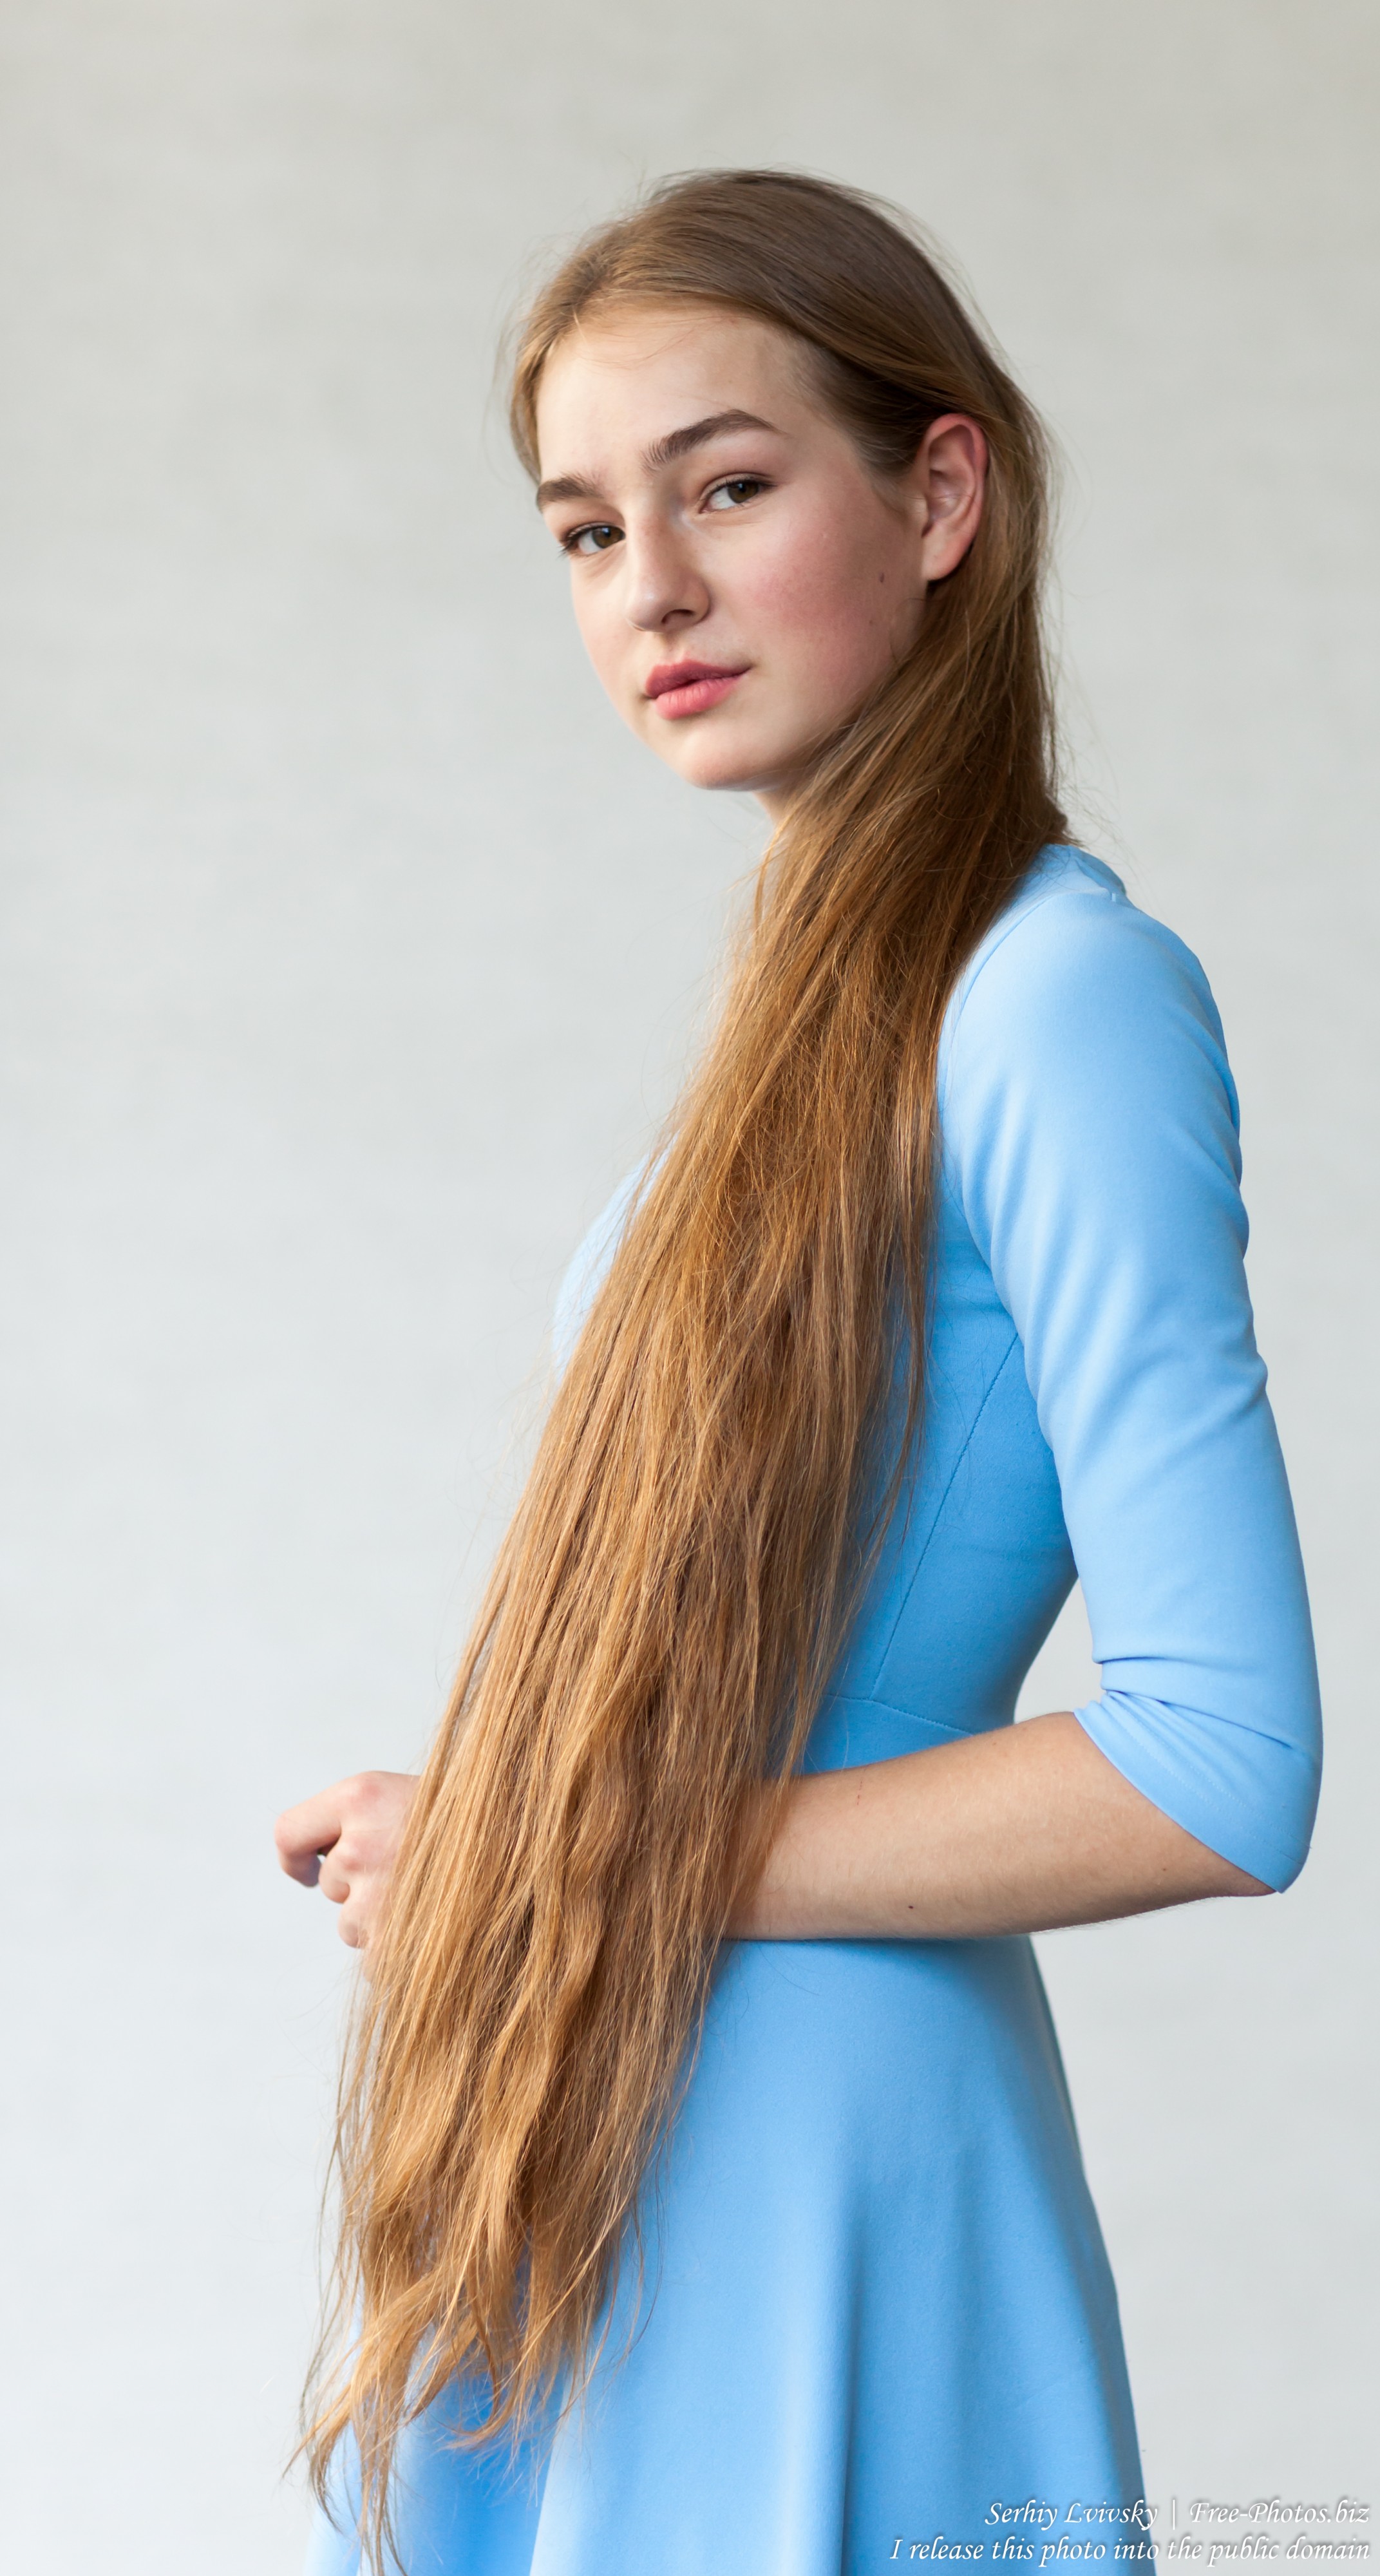 Justyna - a 16-year-old fair-haired girl photographed in June 2018 by Serhiy Lvivsky, picture 1